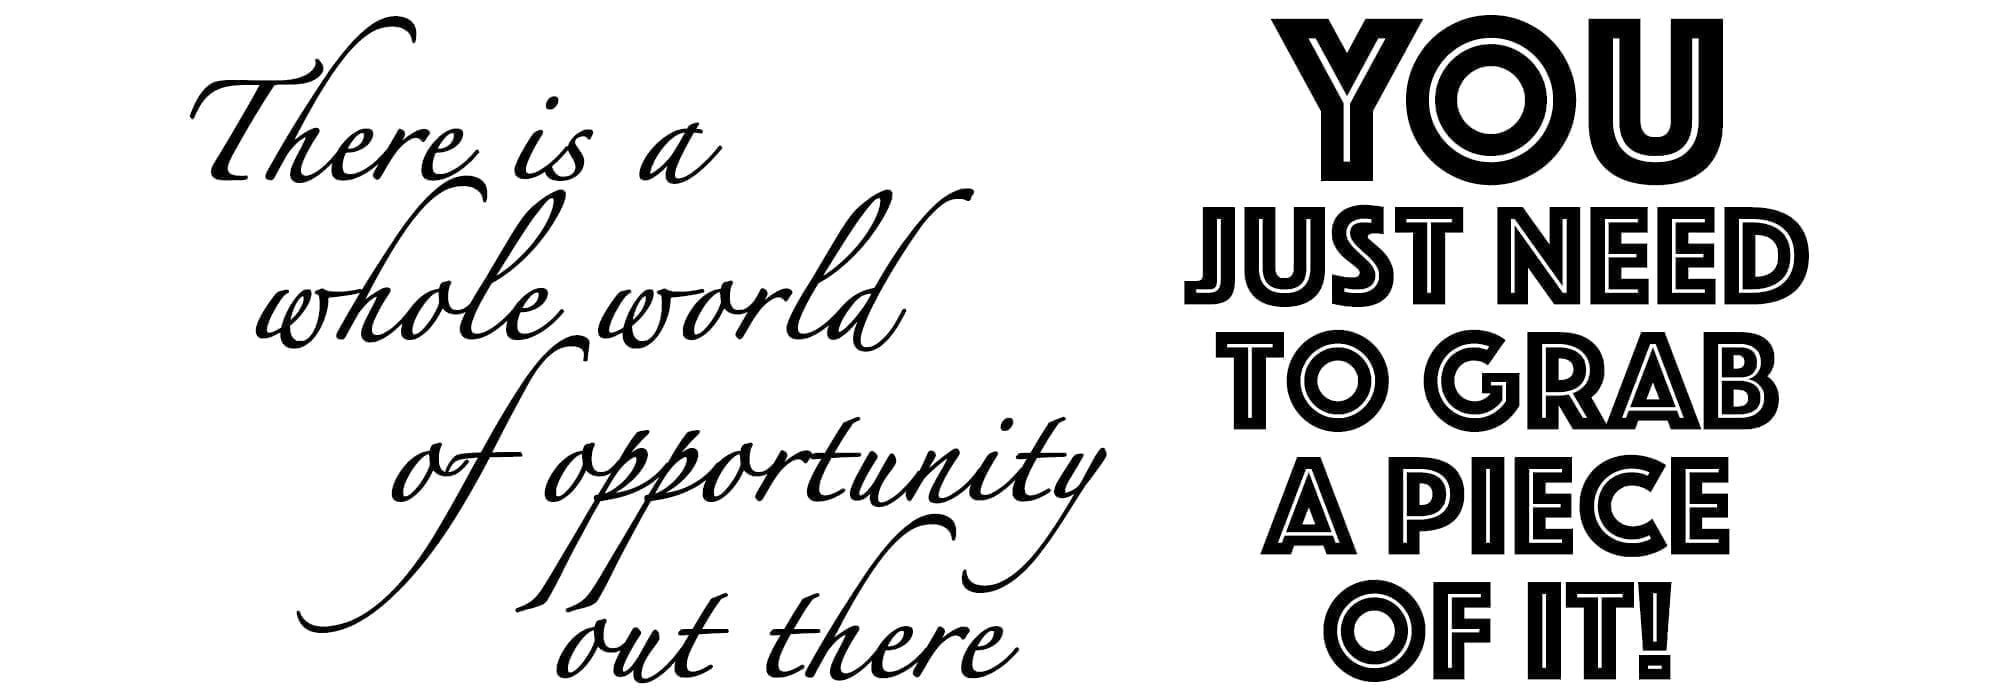 There is a whole world of opportunity out there - Seventa Makeup Academy